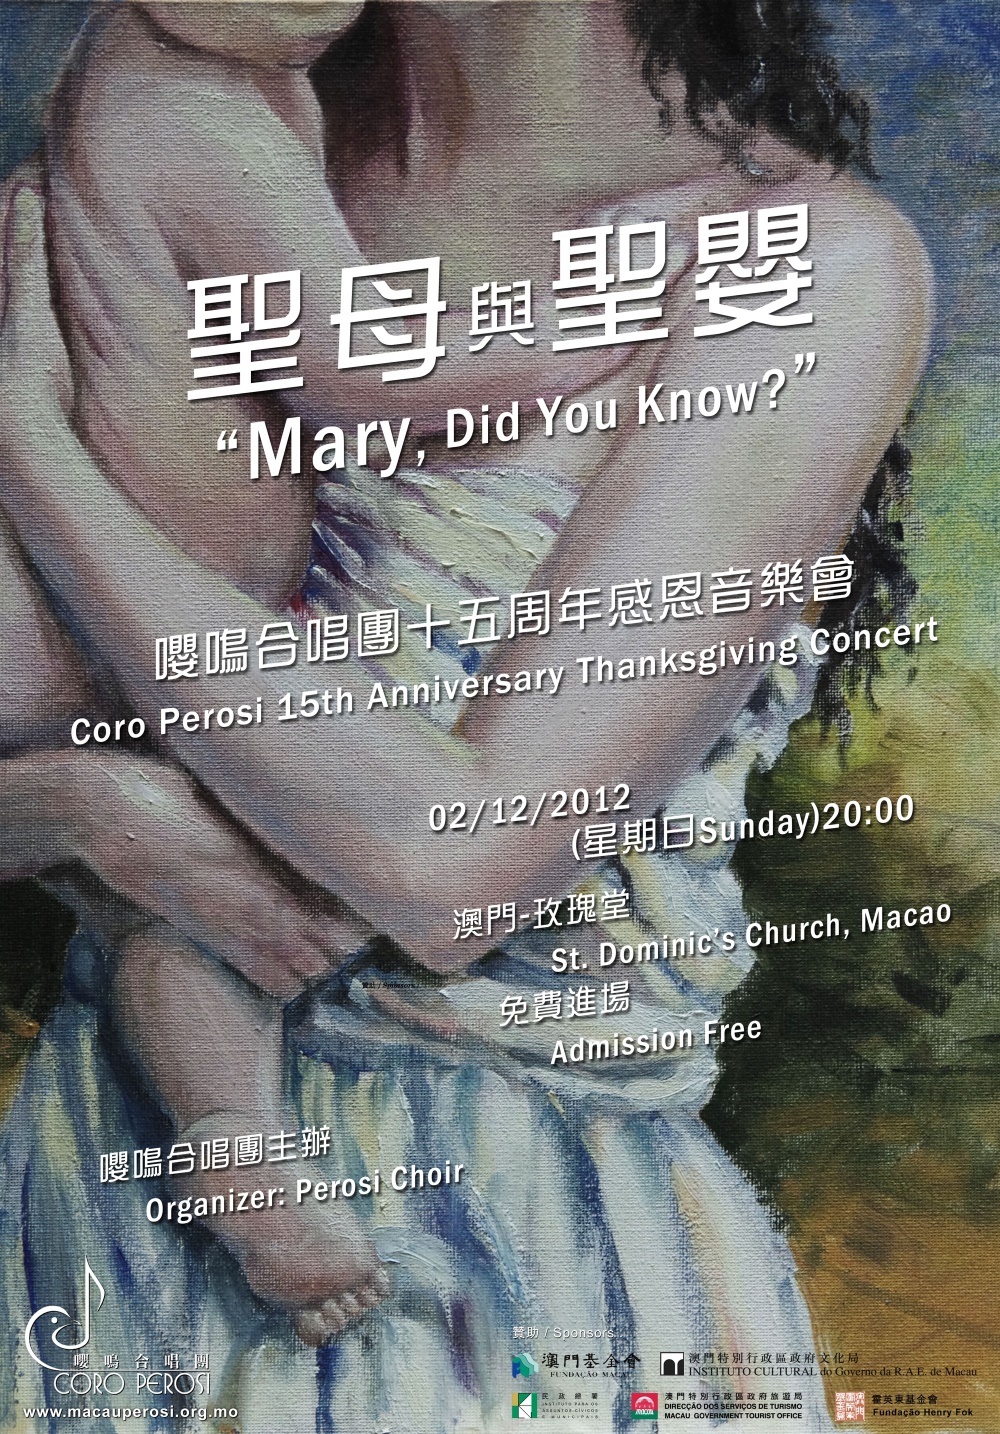 Mary, Did you know?